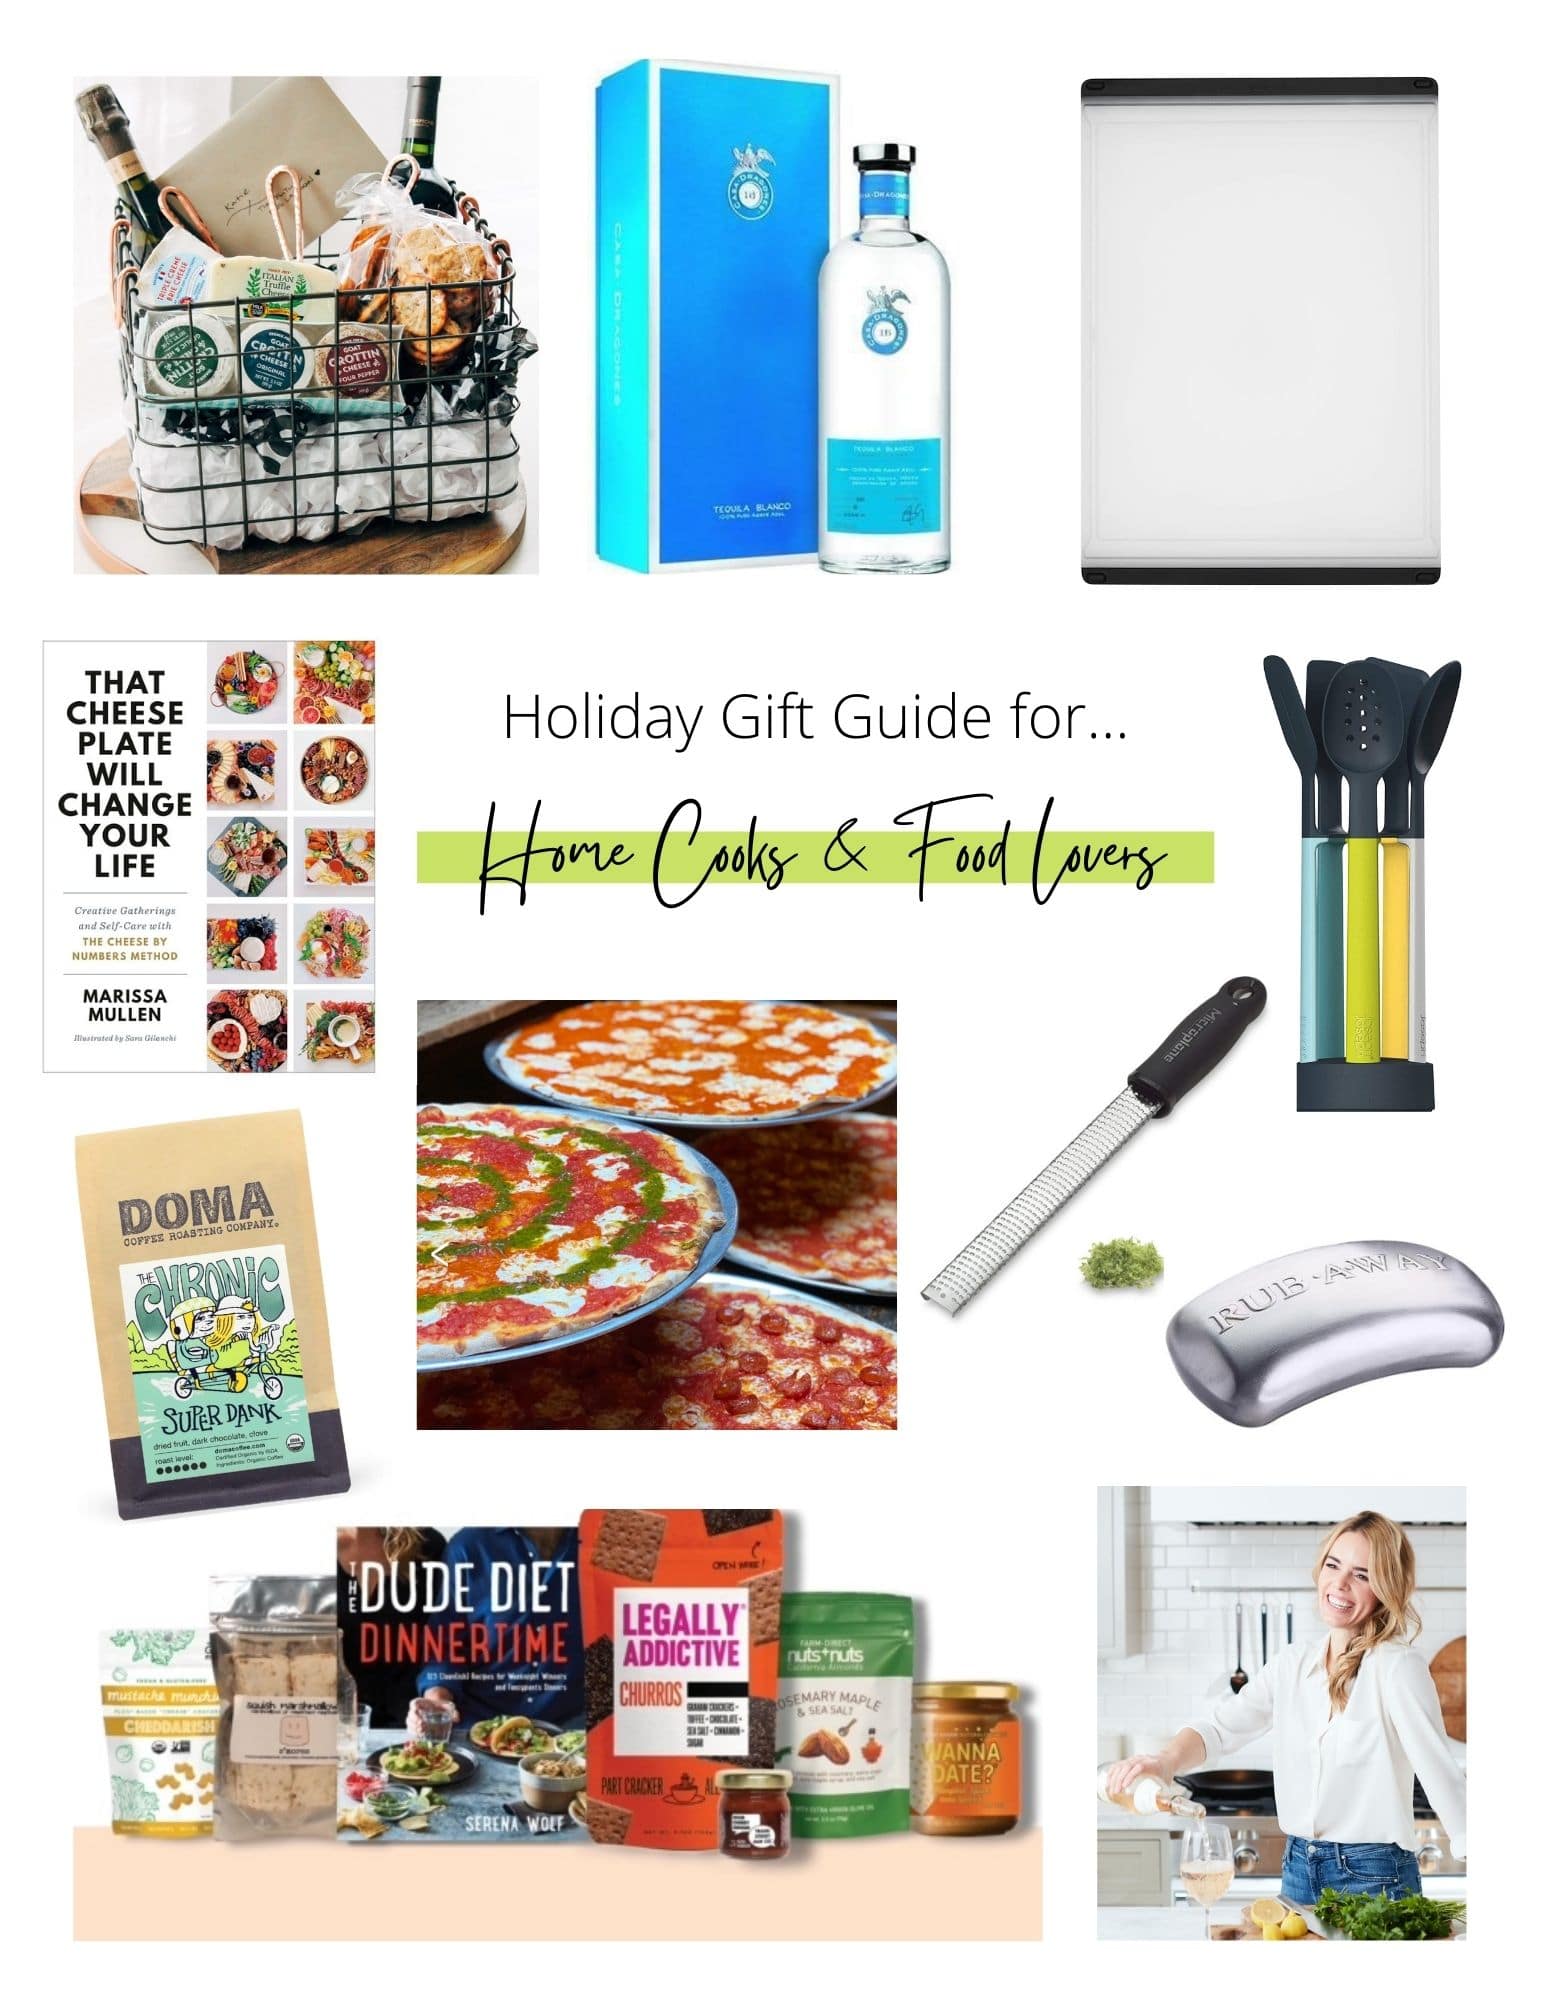 Collage of gift ideas for home cooks and food lovers.